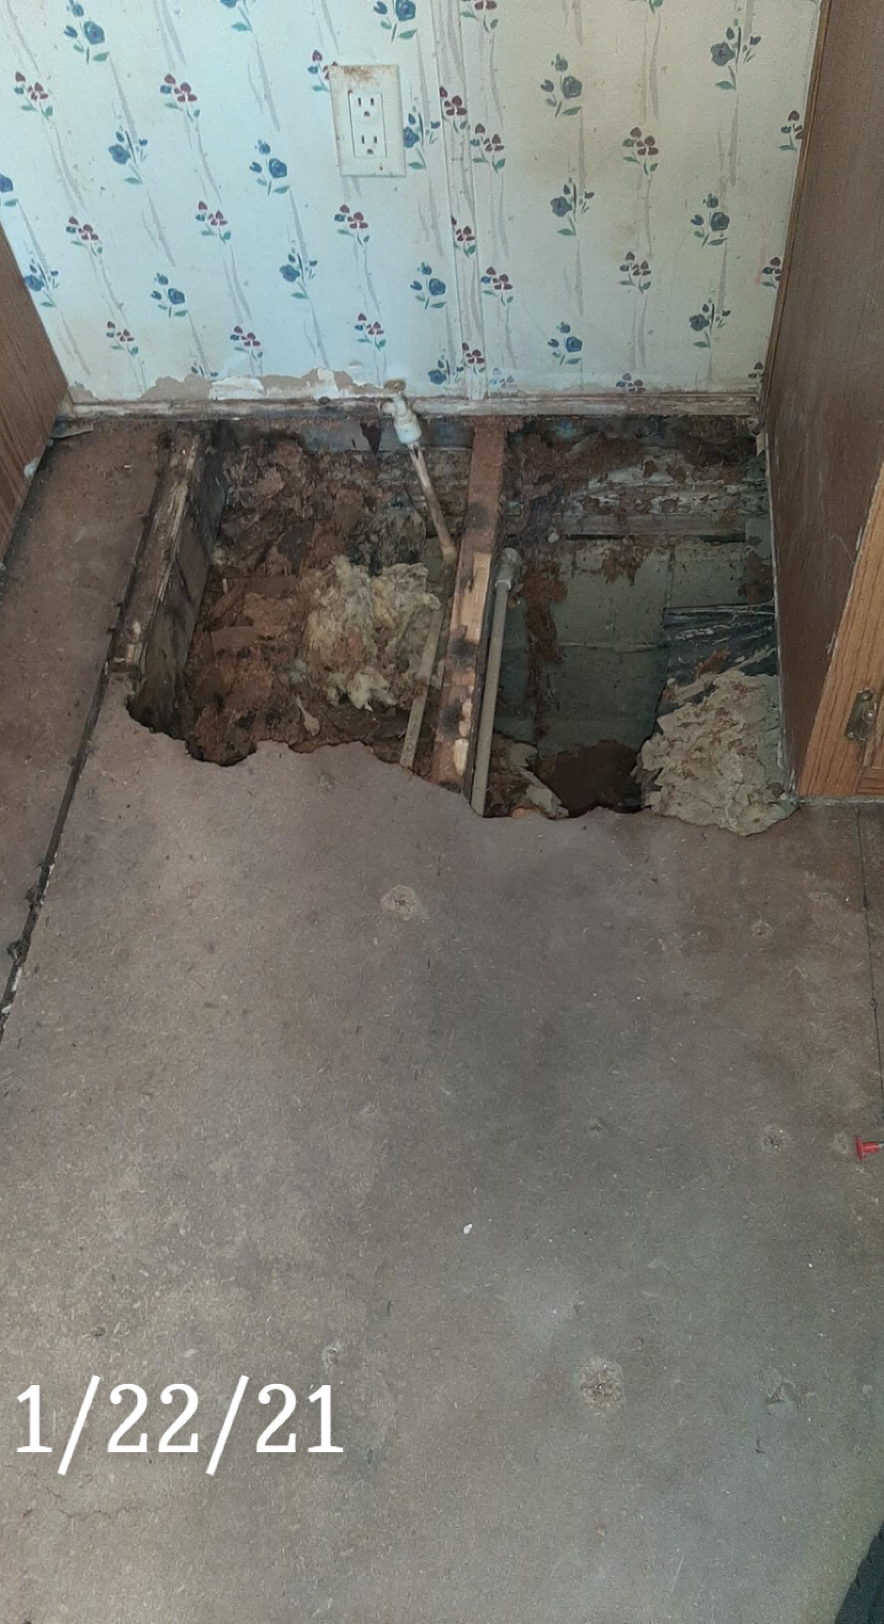 Rotted out sub flooring from previous flood